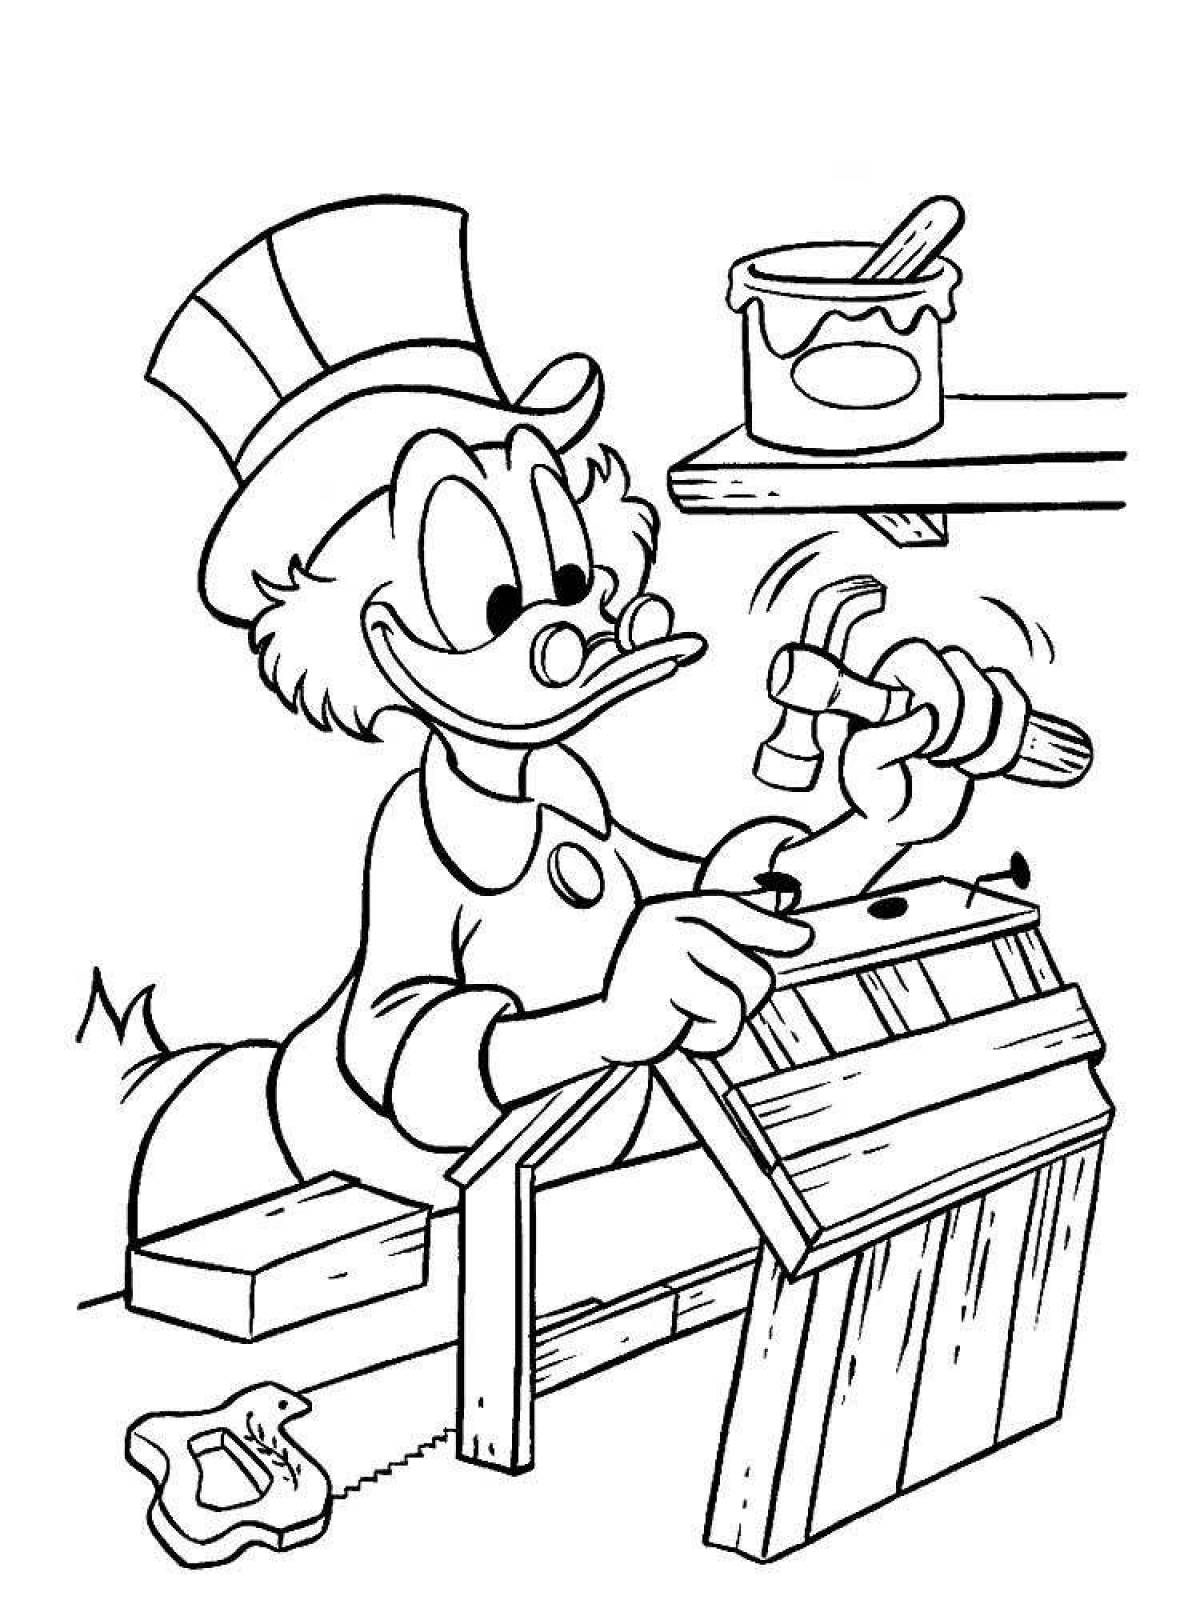 Coloring page of sociable scrooge mcduck